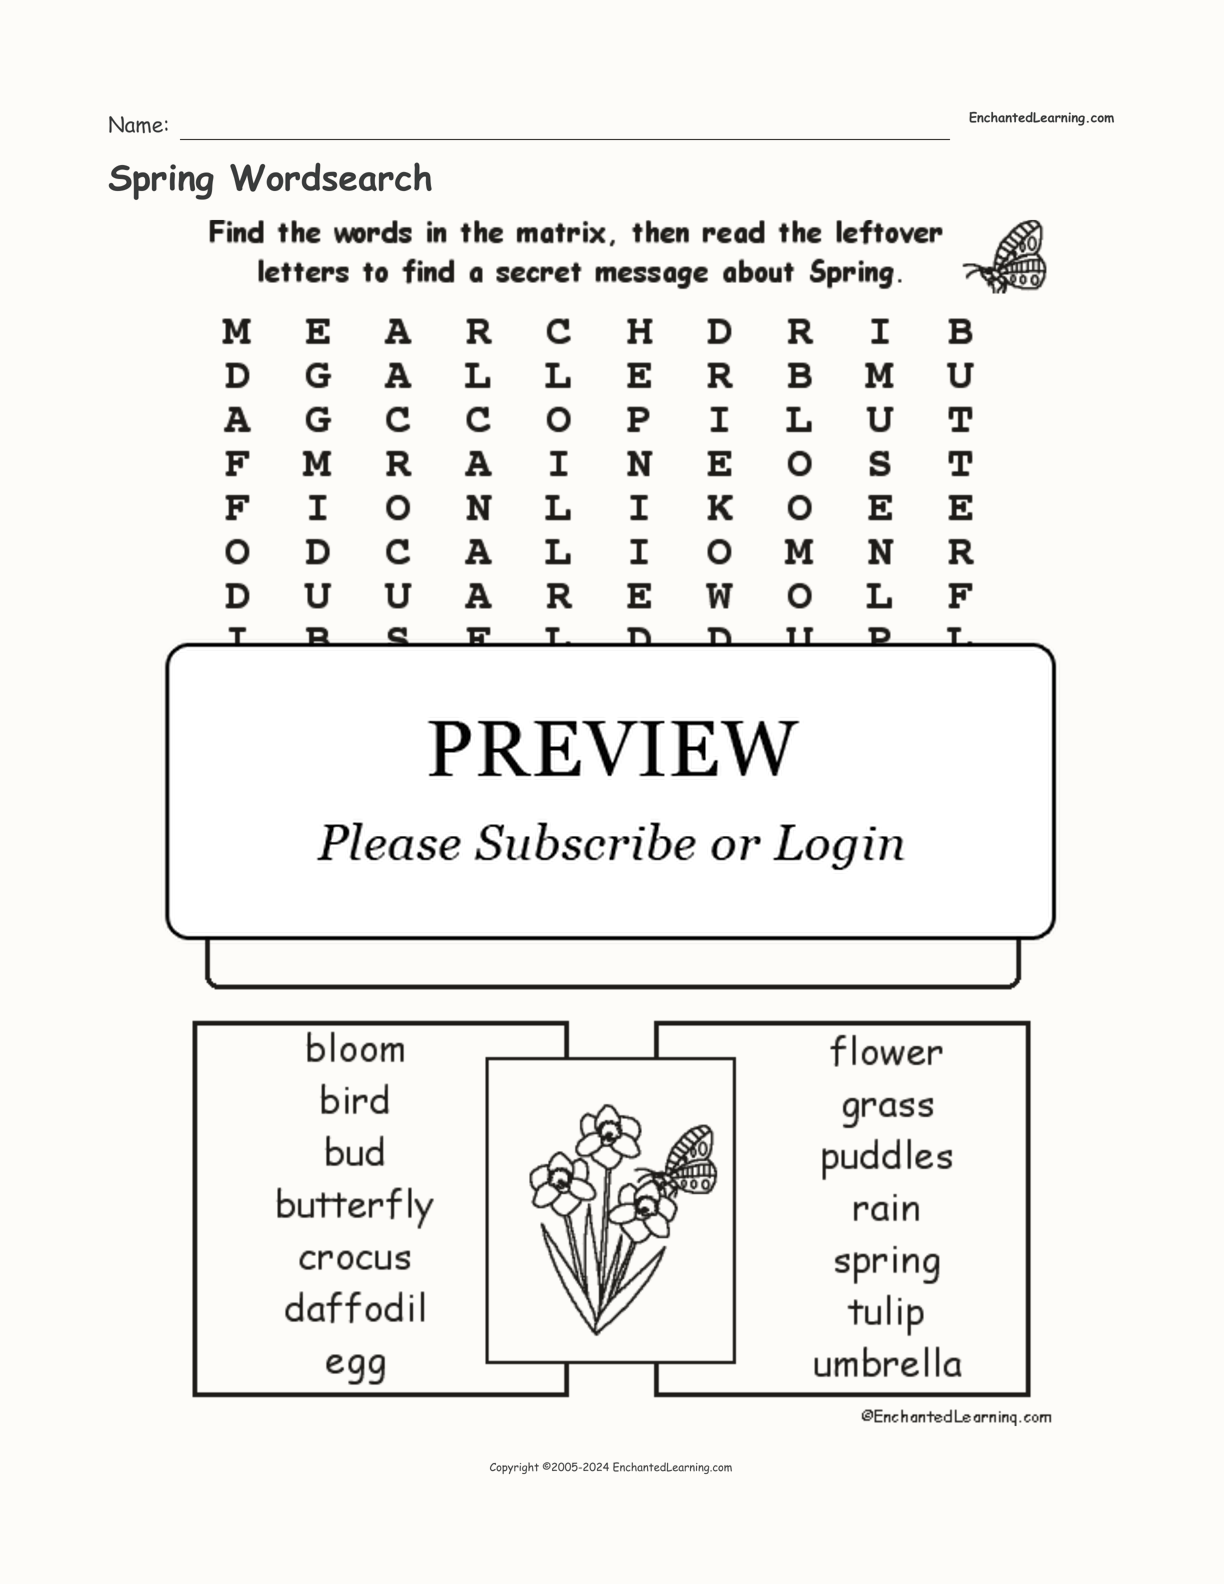 Spring Wordsearch interactive worksheet page 1